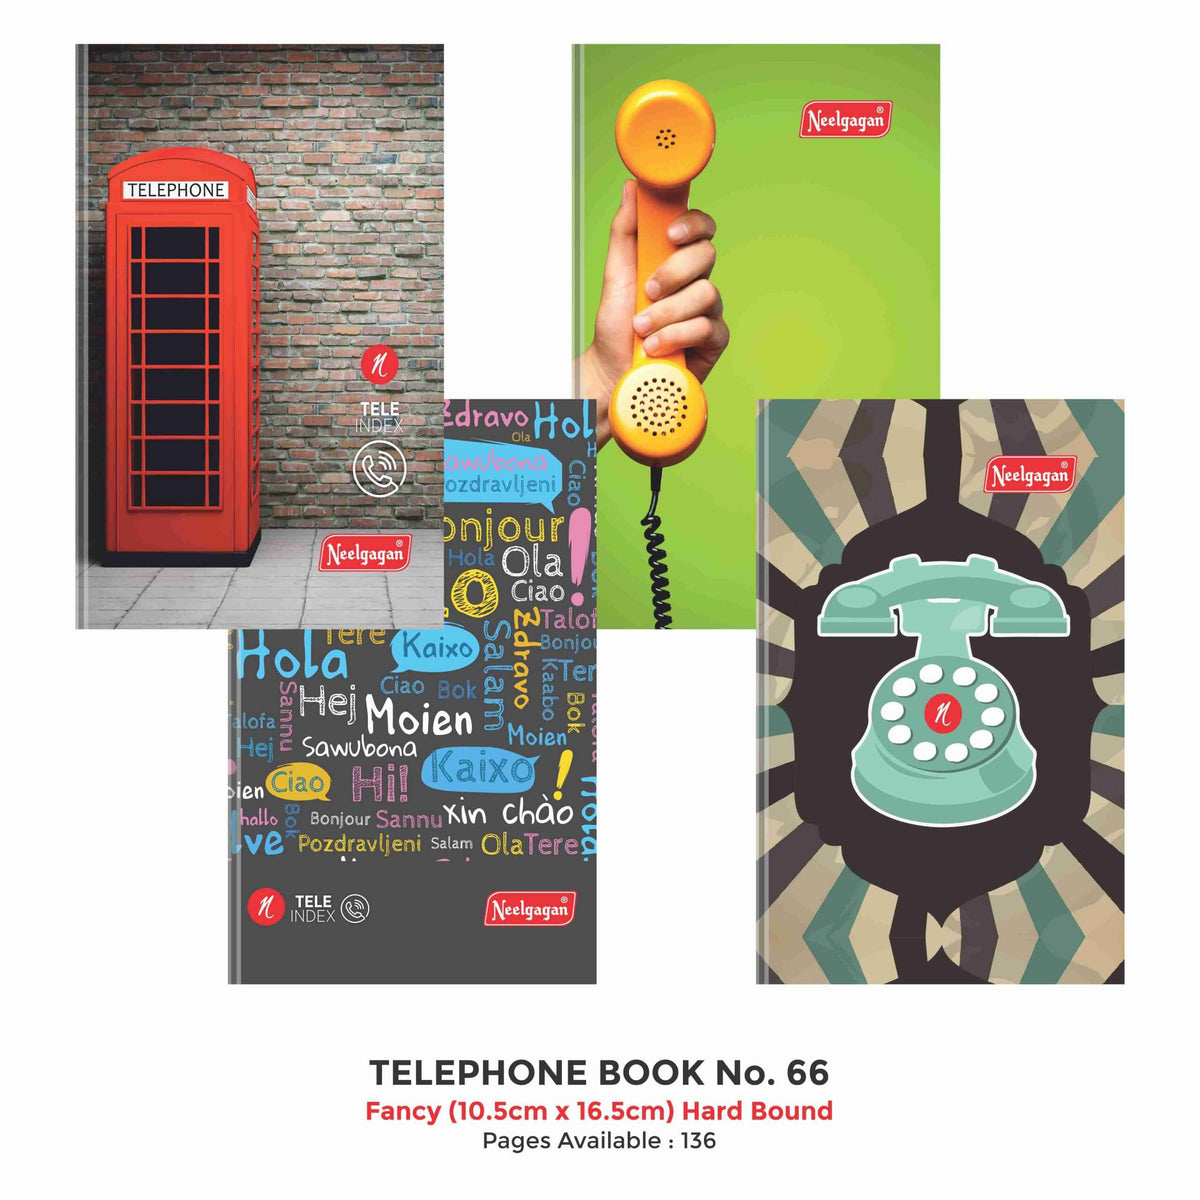 Telephone Book (Fancy) 136 pages, No.66 (10.5 cm x 16.5 cm) Hard Bound